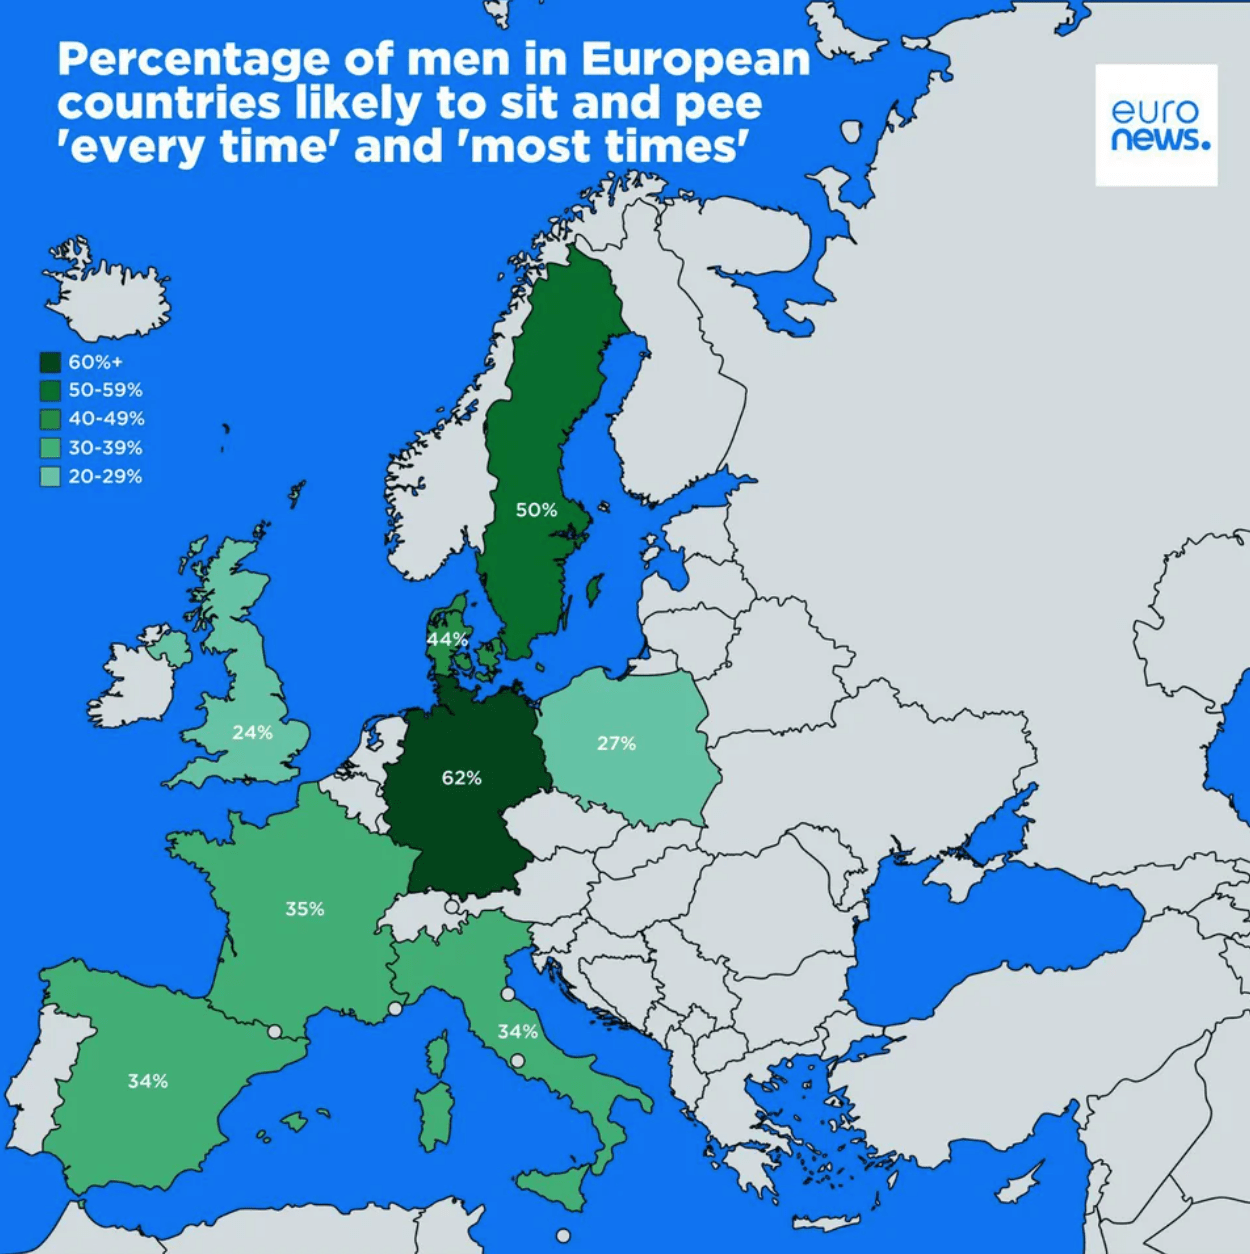 a map of europe showing percentage of men in european countries likely to sit and pee.